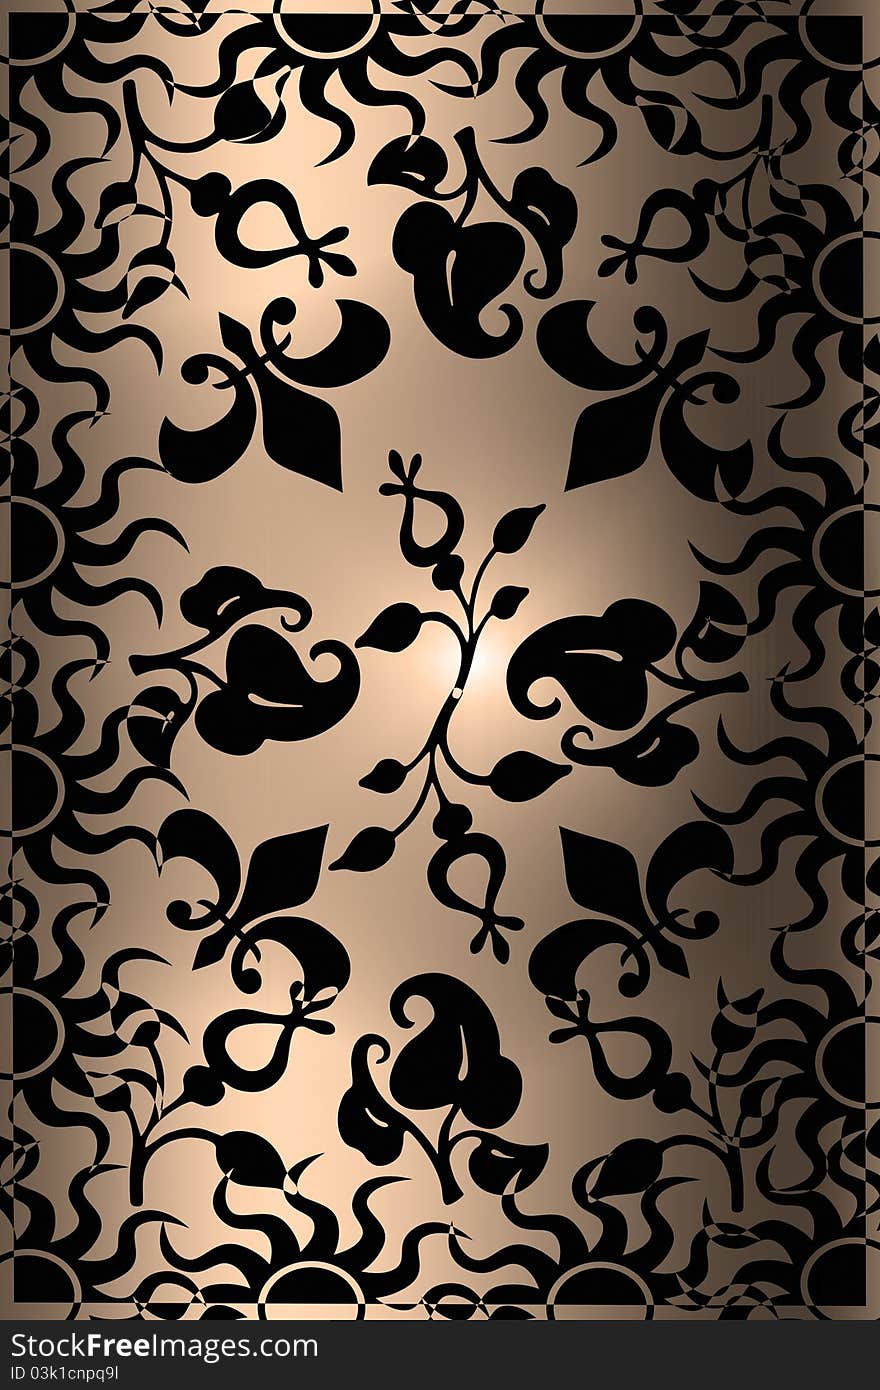 Wallpaper pattern created in Adobe PS. Wallpaper pattern created in Adobe PS.